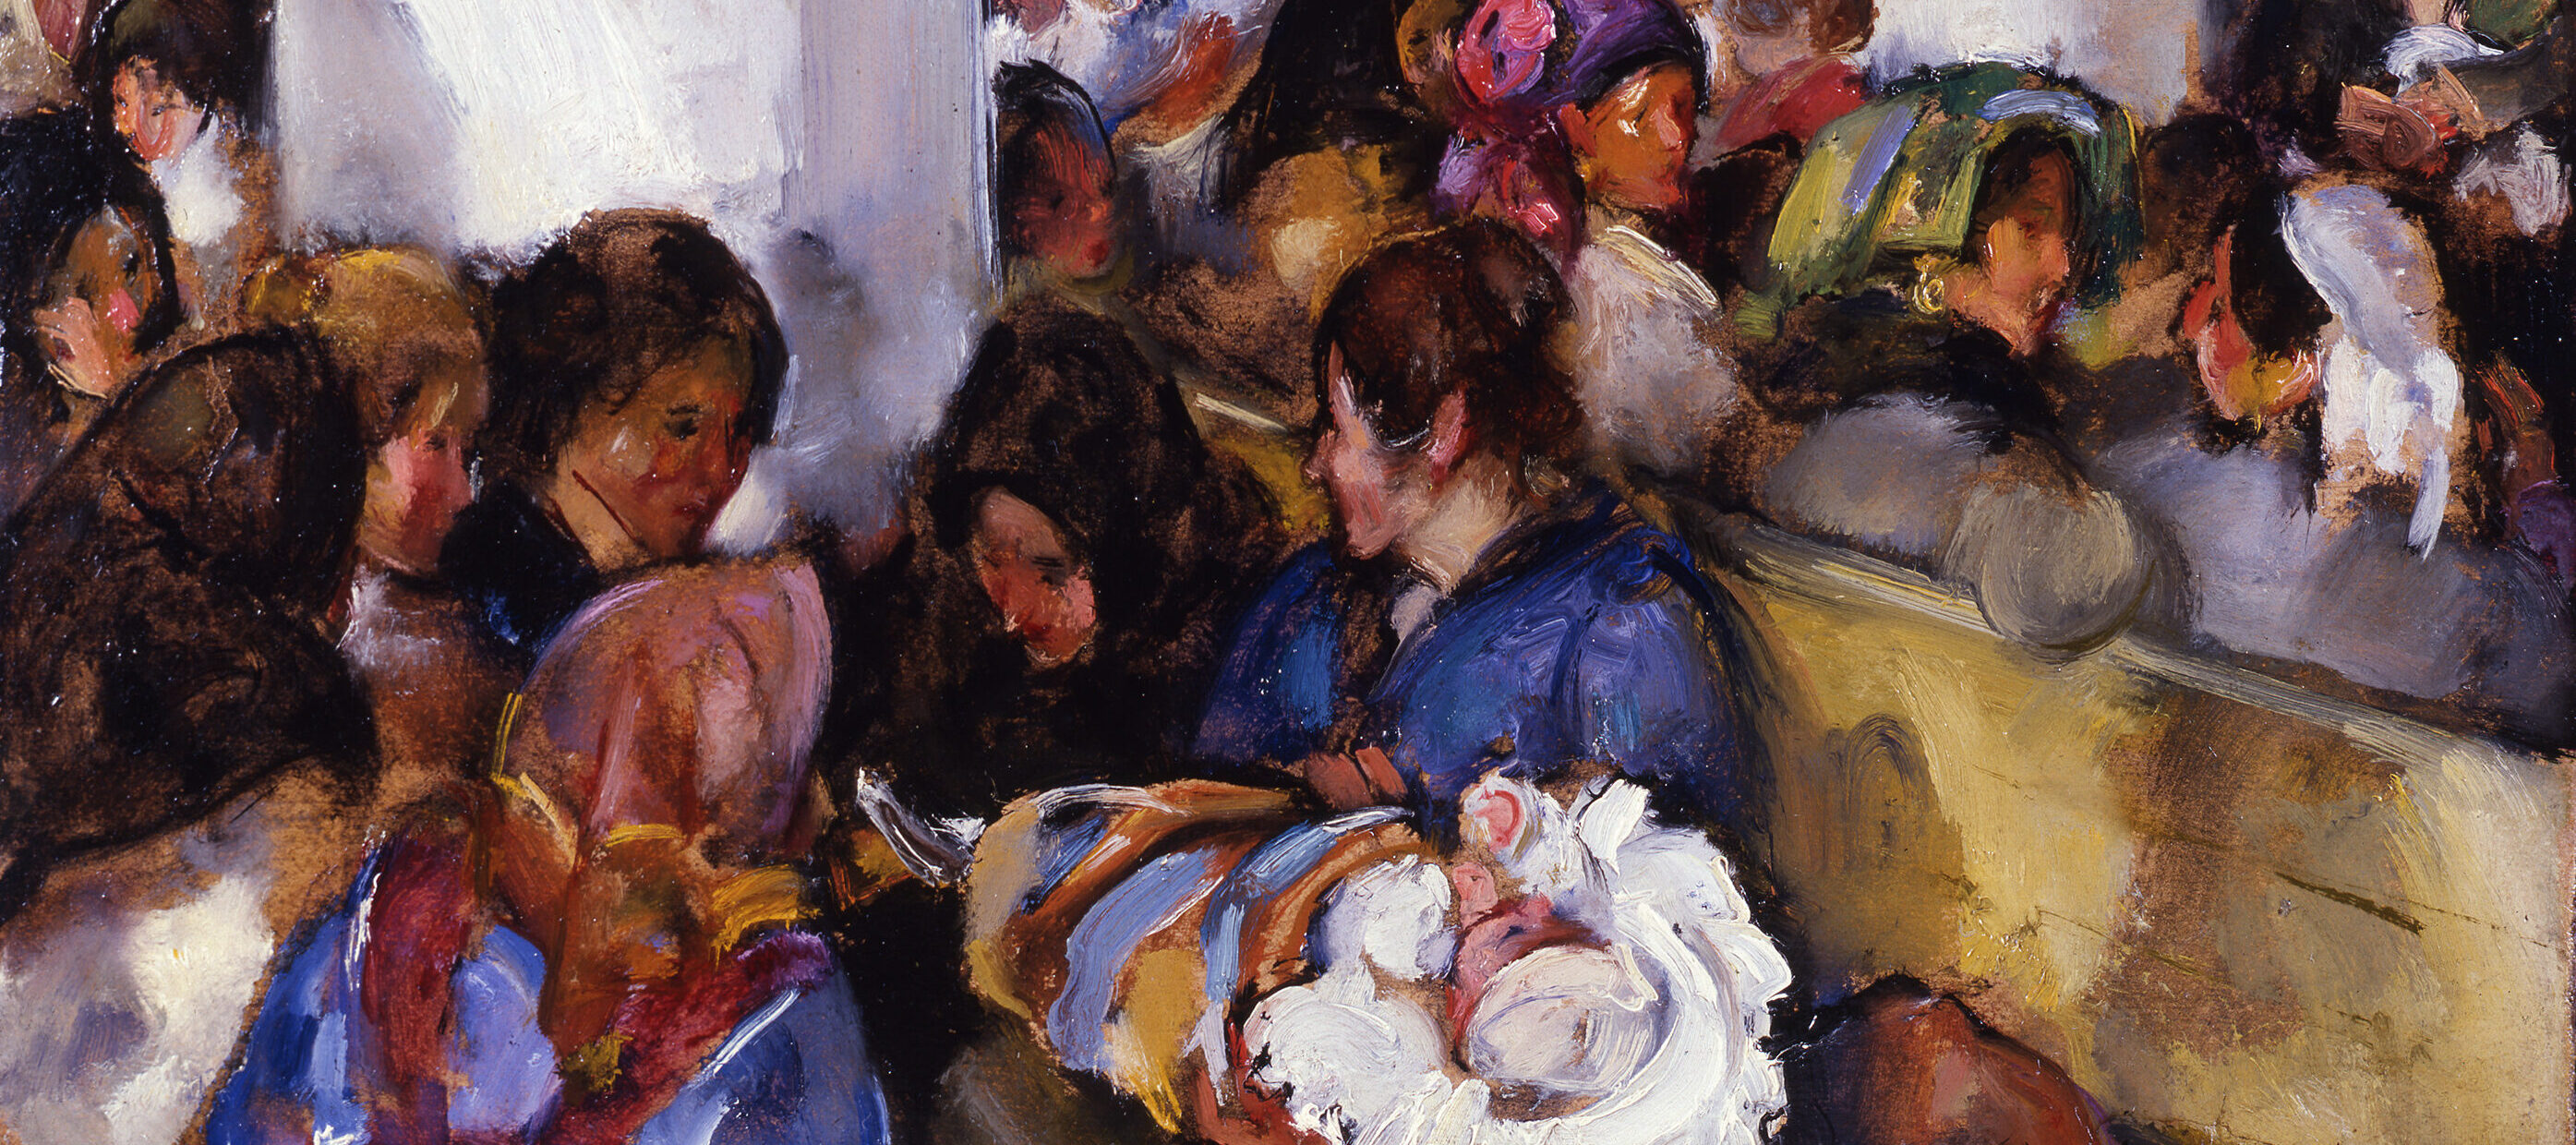 Impressionistic painting of a crowded room with large, white pillars and benches. Dozens of light-skinned women and girls in early 20th-century travel garb sit and stand in clusters. A group in the foreground surrounds a swaddled baby, while the others blur into the background.